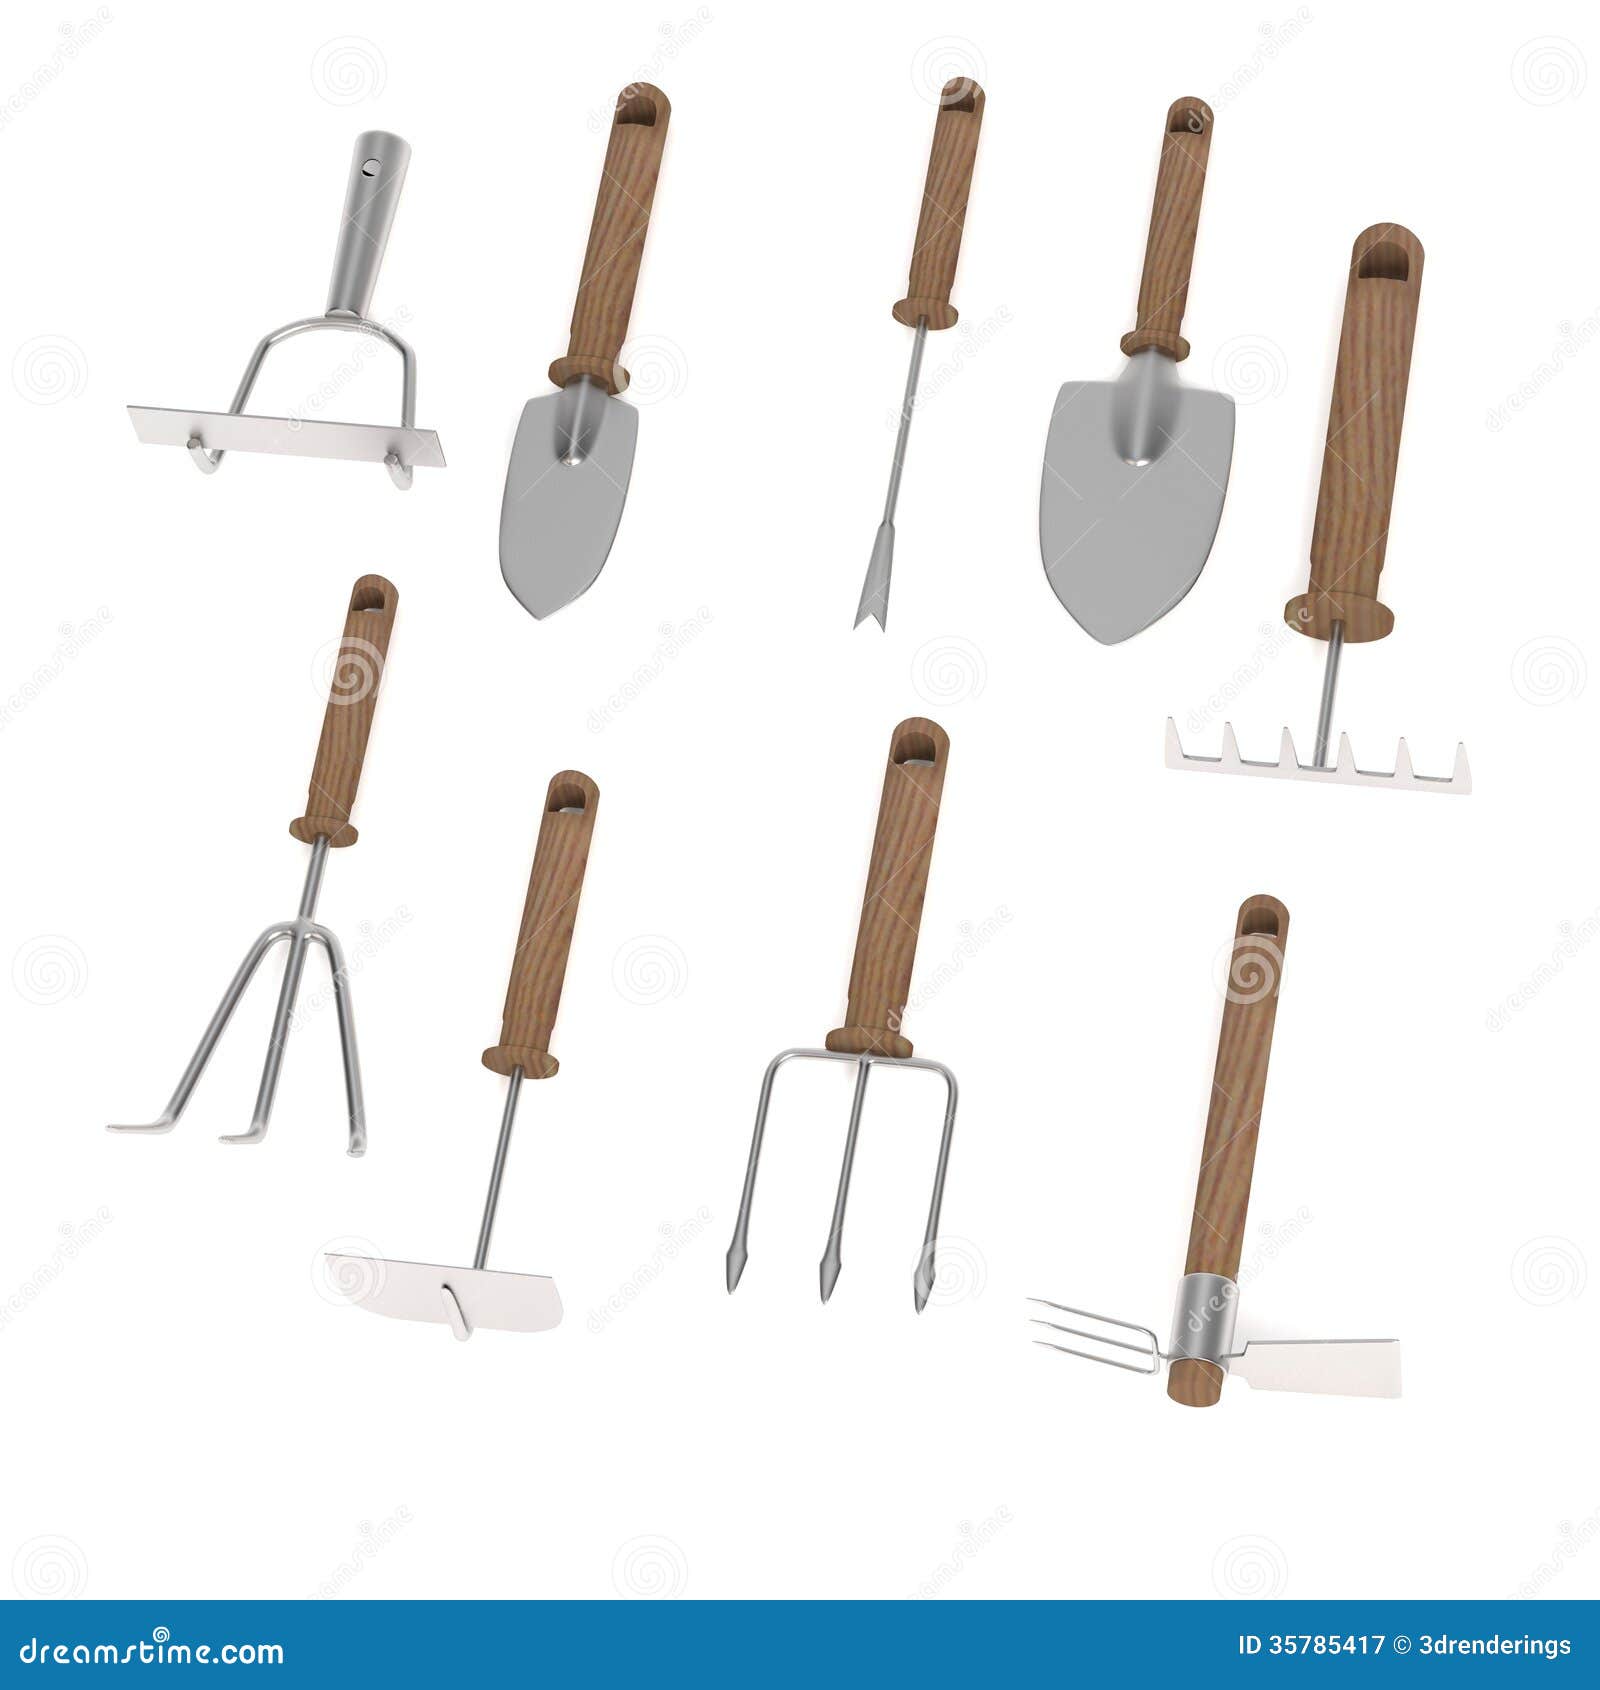 3d Render Of Garden Tools Royalty Free Stock Photography ...